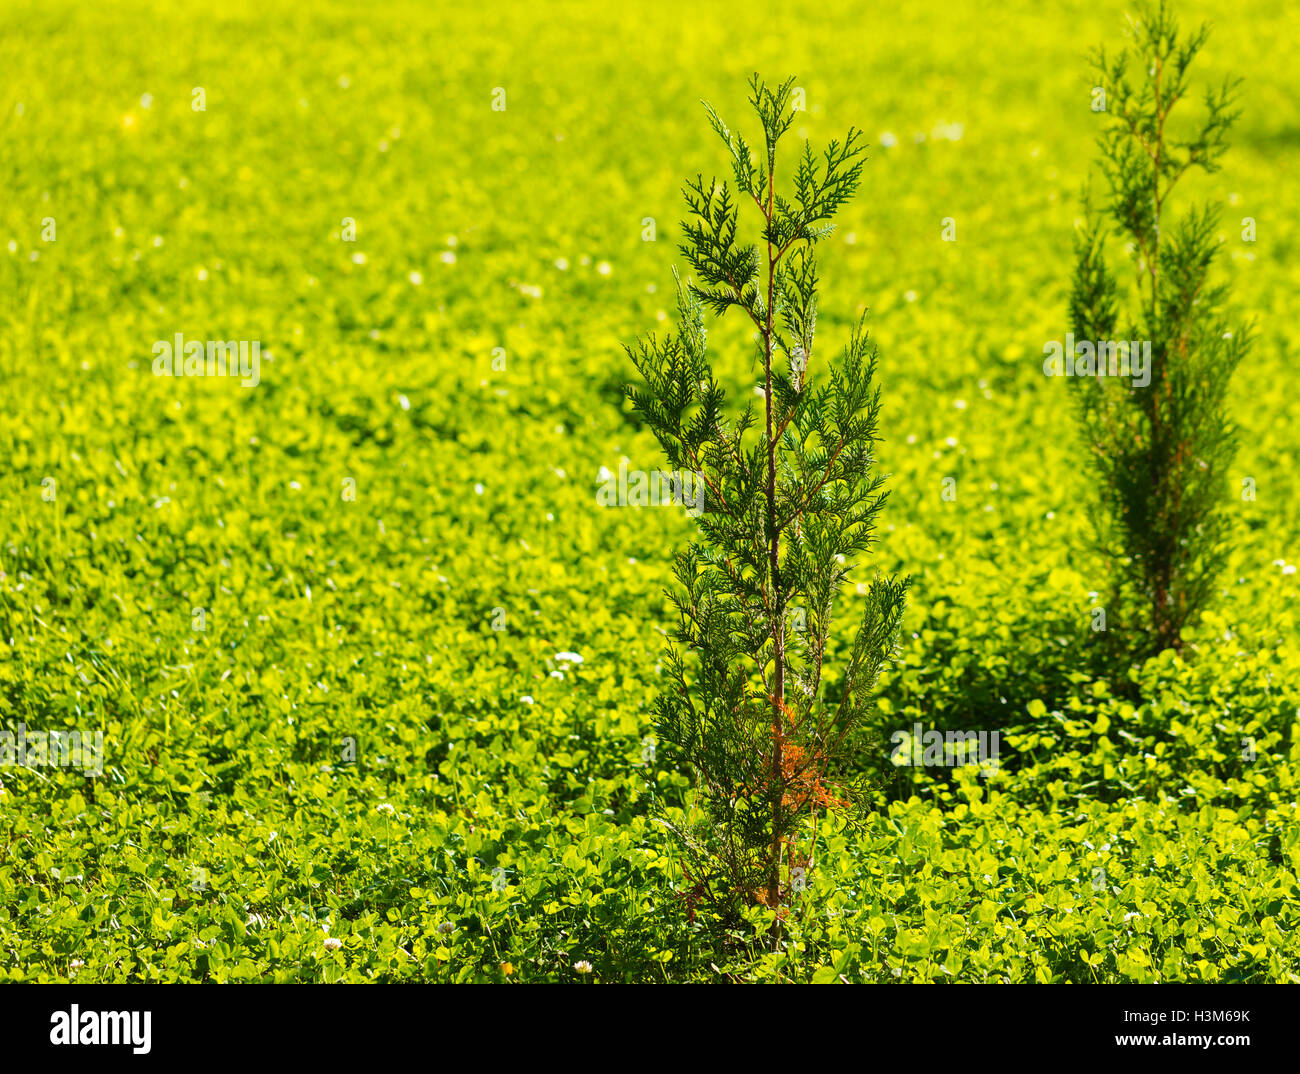 the growing Thuja in a bright green grass Stock Photo